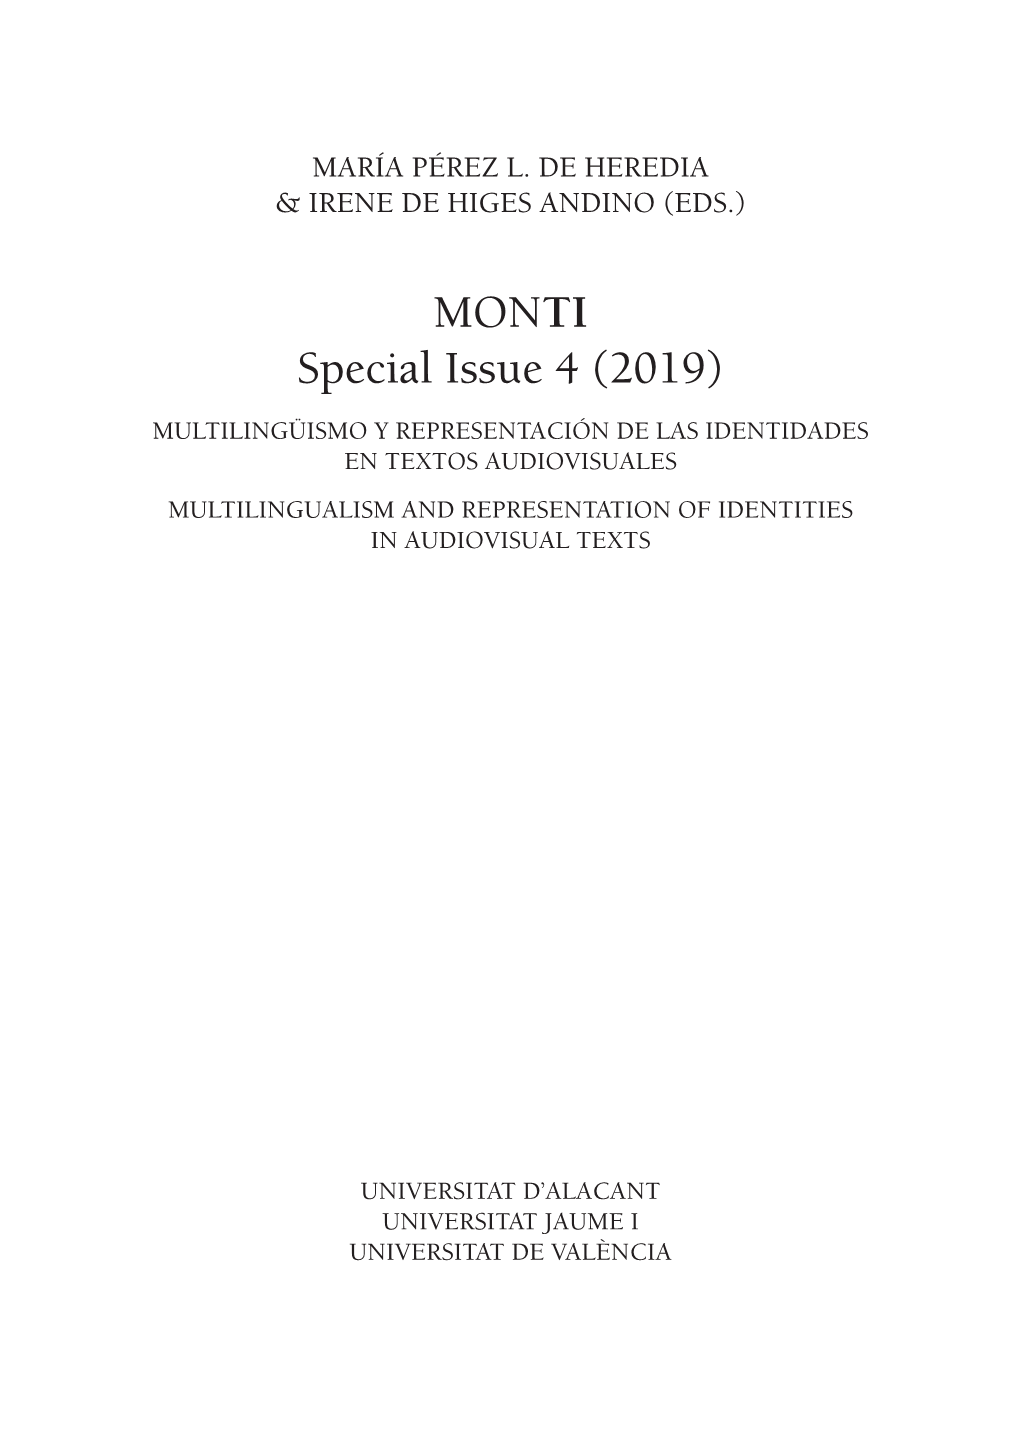 Monti Special Issue 4